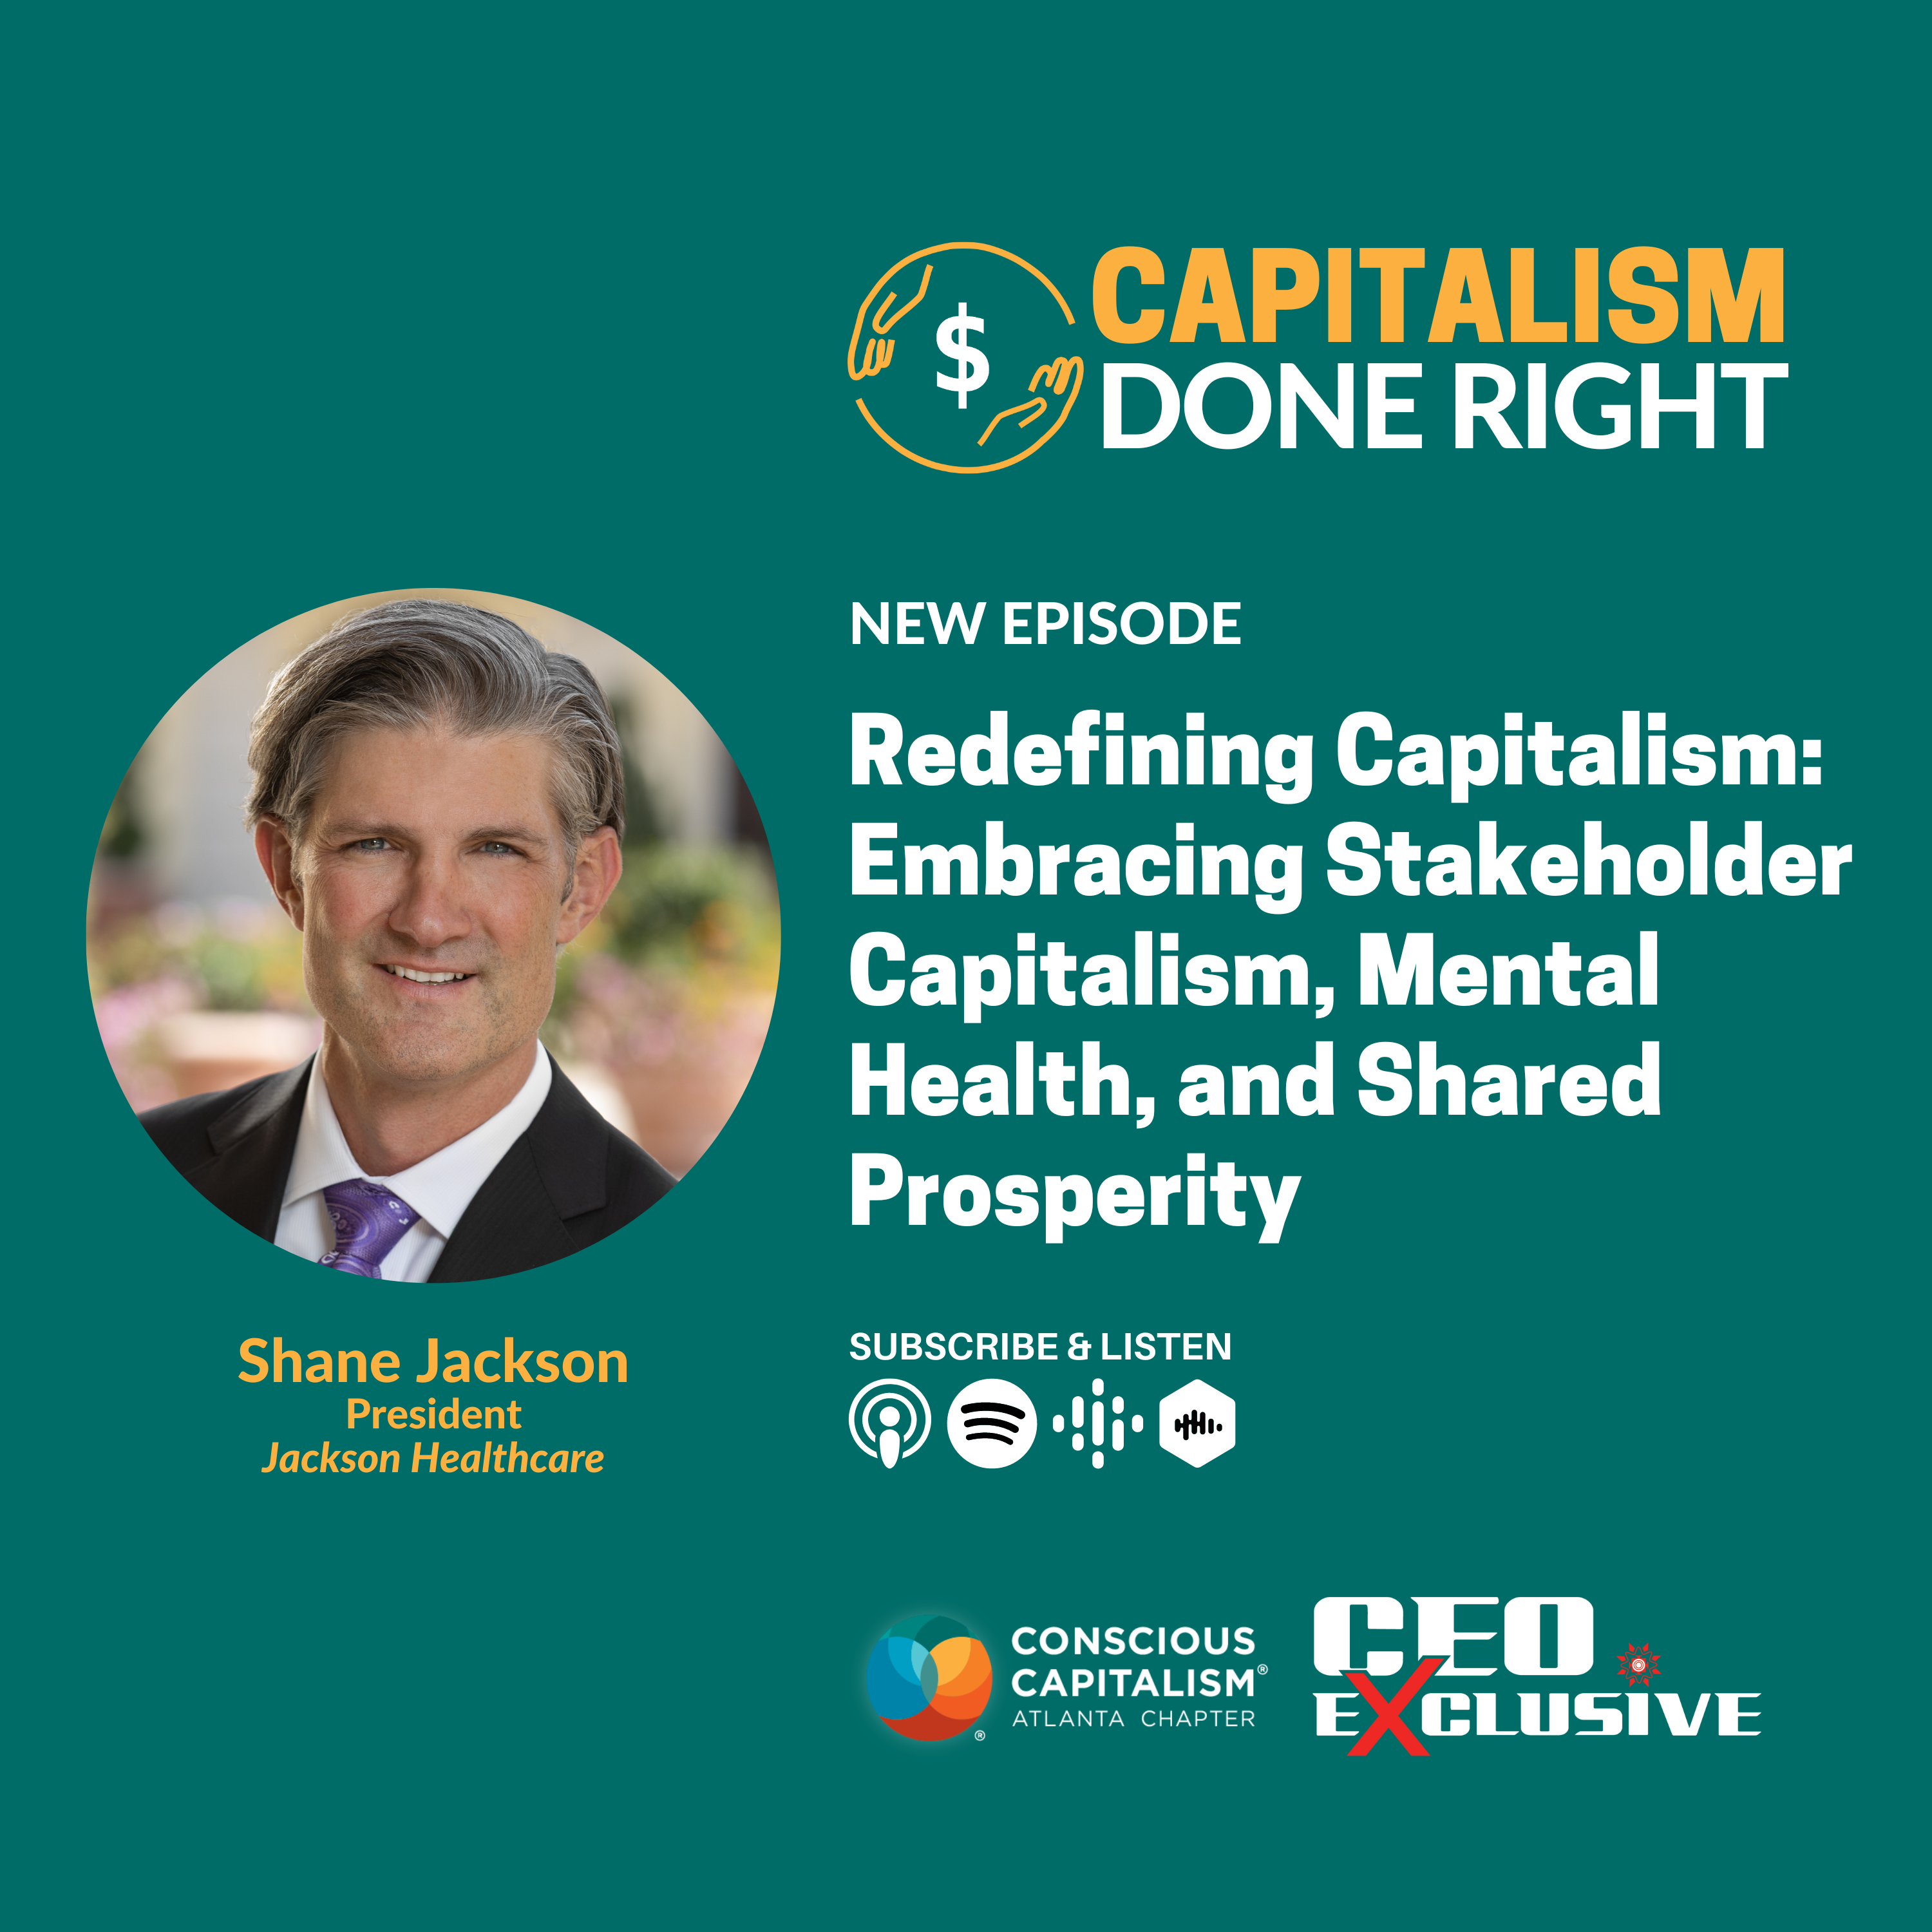 Capitalism Done Right Episode Cover - Shane Jackson